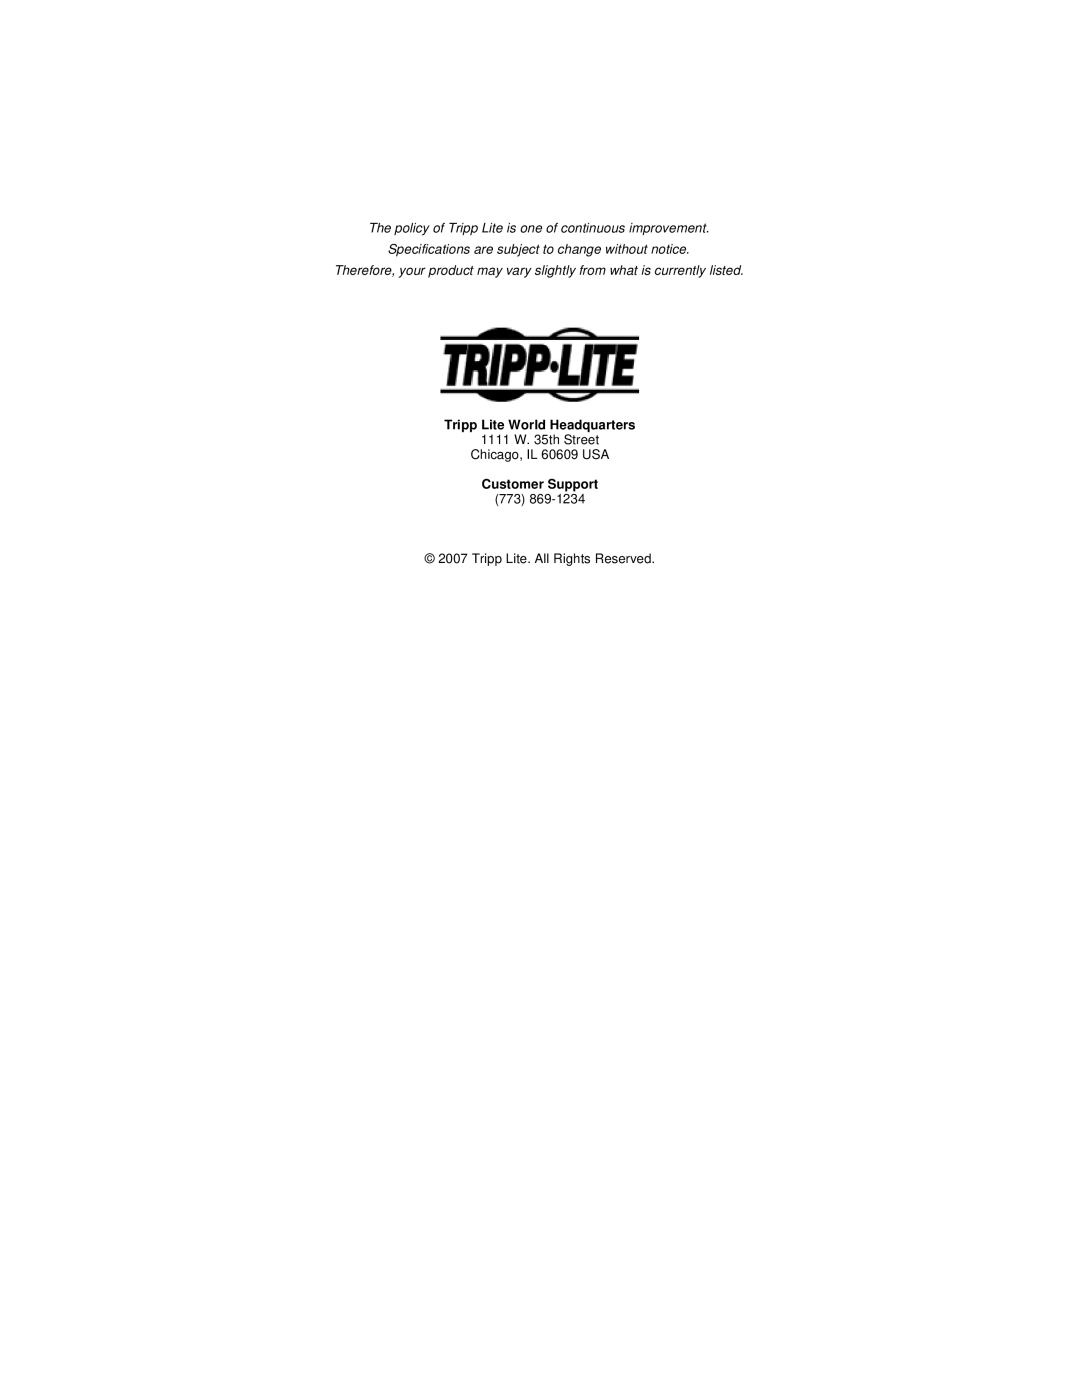 Tripp Lite B006-004-R The policy of Tripp Lite is one of continuous improvement, Tripp Lite World Headquarters 